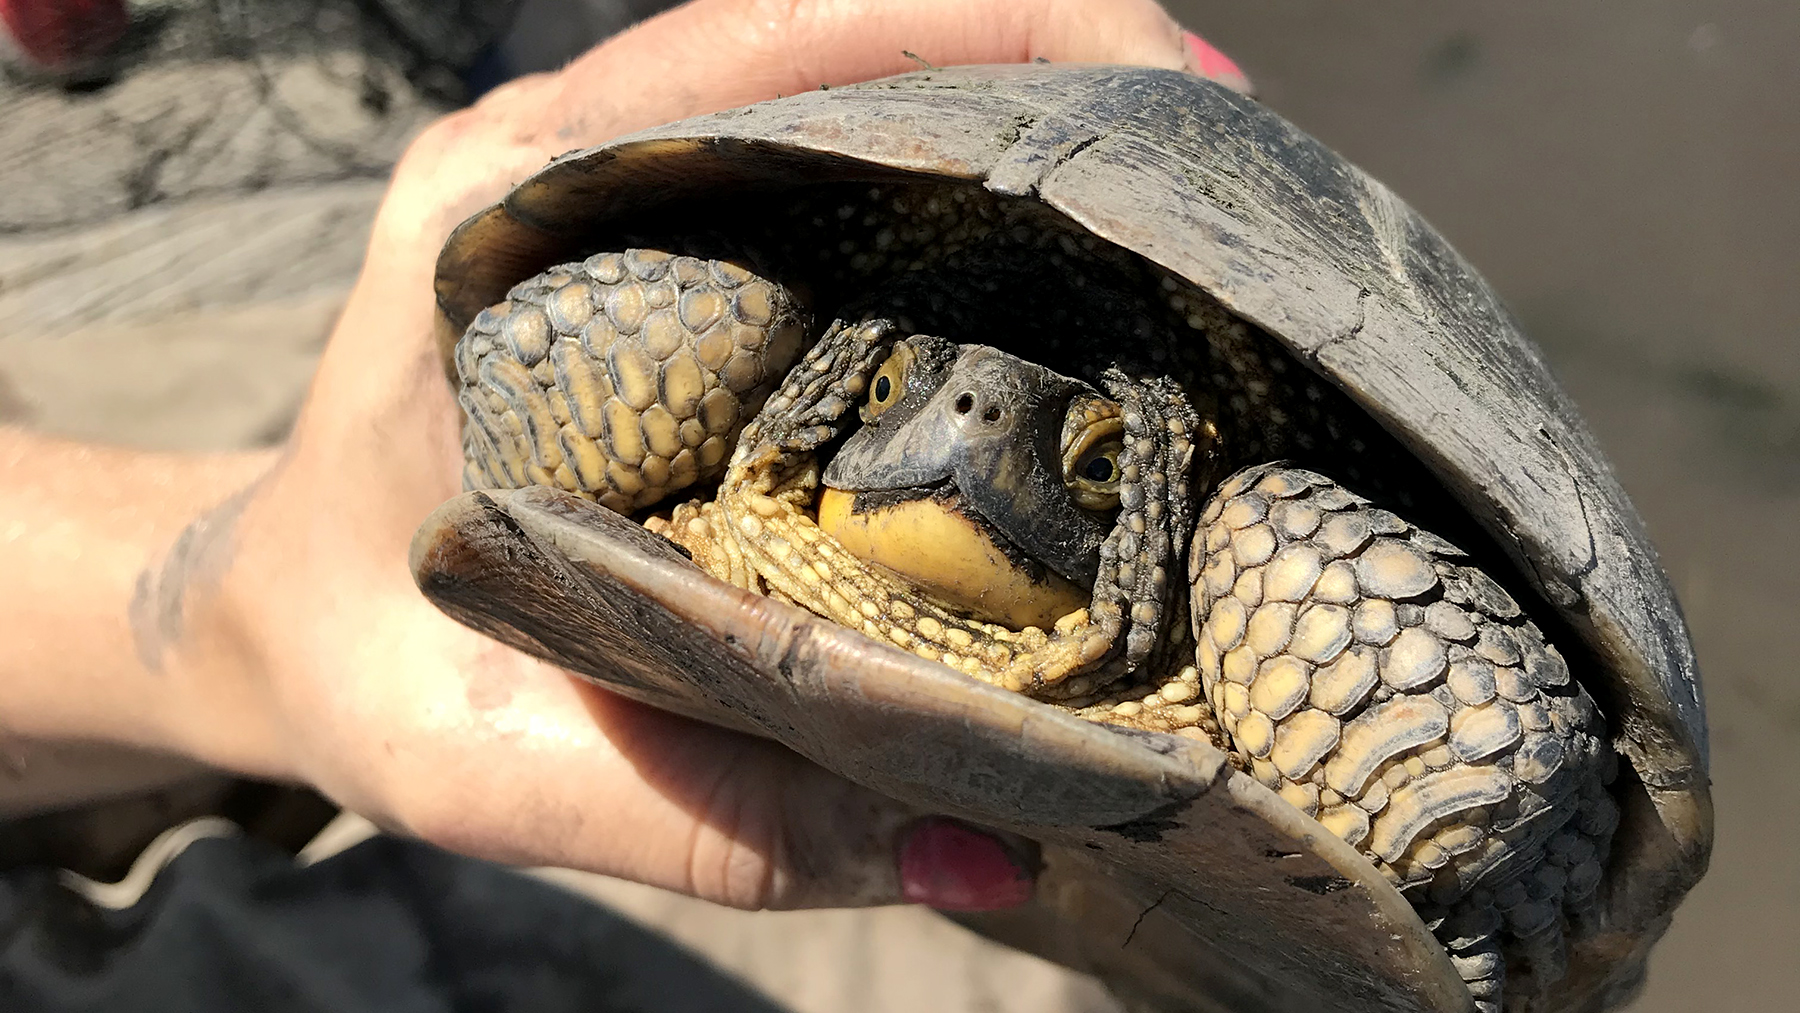 A Blanding’s turtle held in field researcher's hand.  Photo by Andrea Colton and Emily Sunnucks